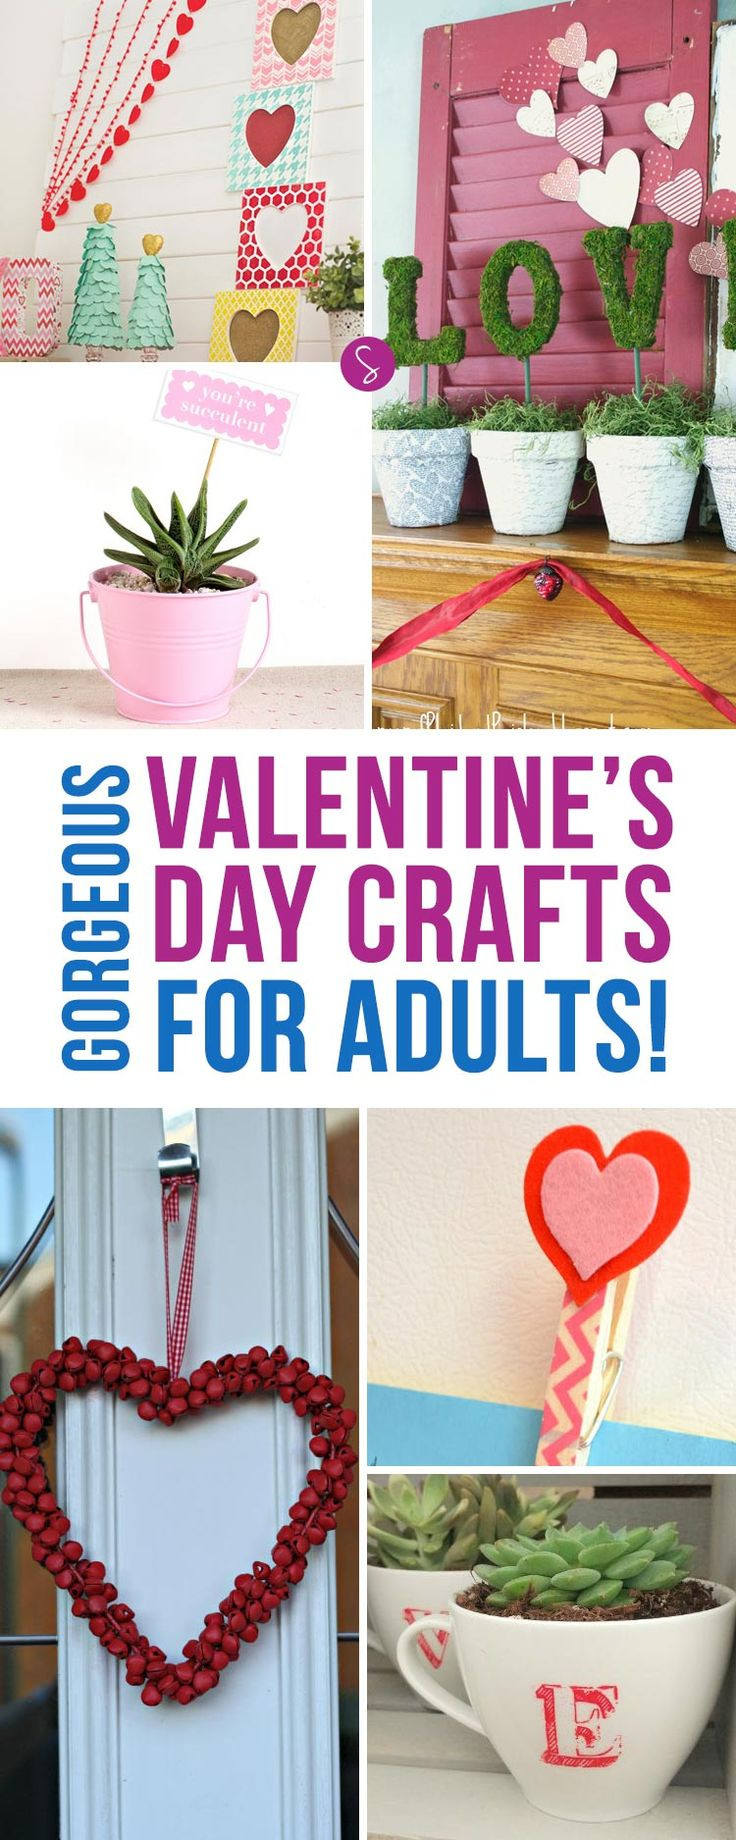 Valentines Craft Ideas For Adults
 194 best images about Valentines Crafts on Pinterest